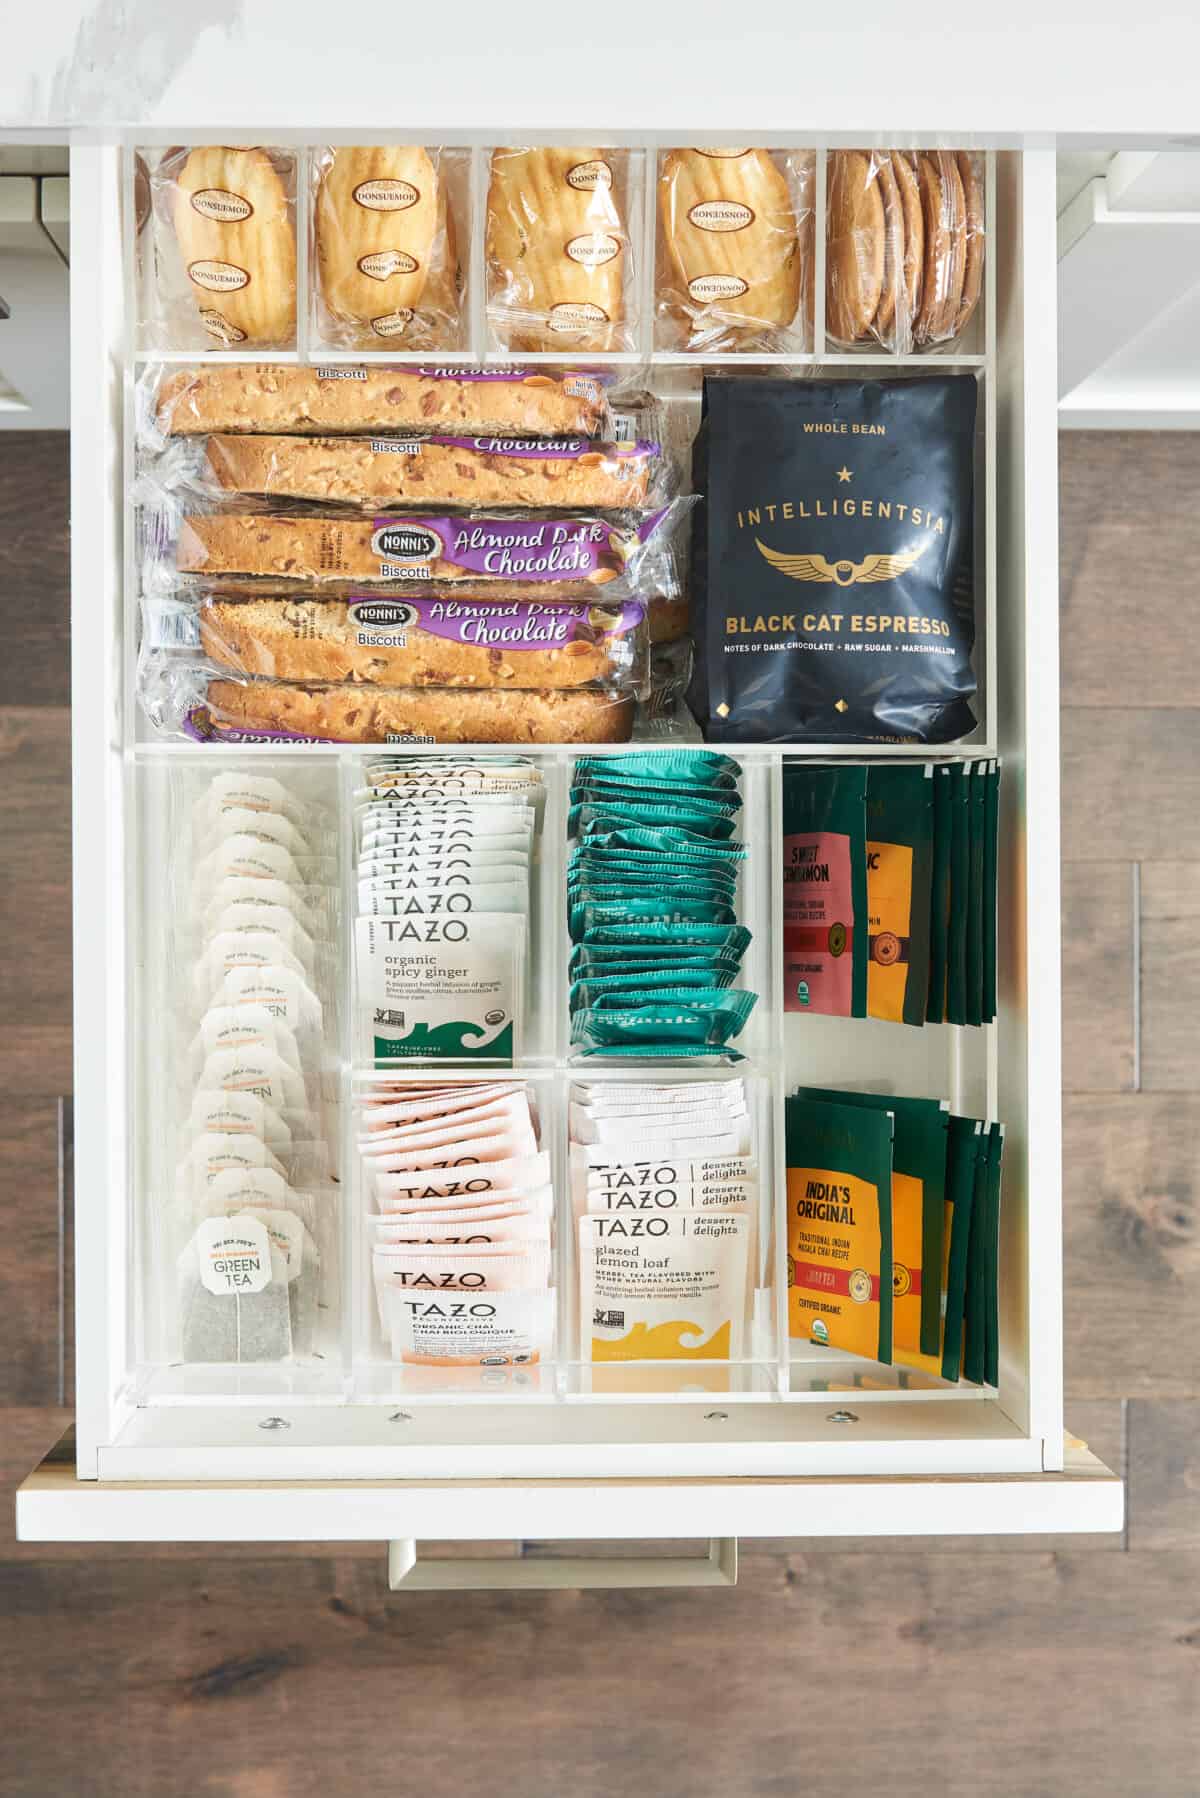 Here's Everything You Need To Know About Tea Drawer Organization